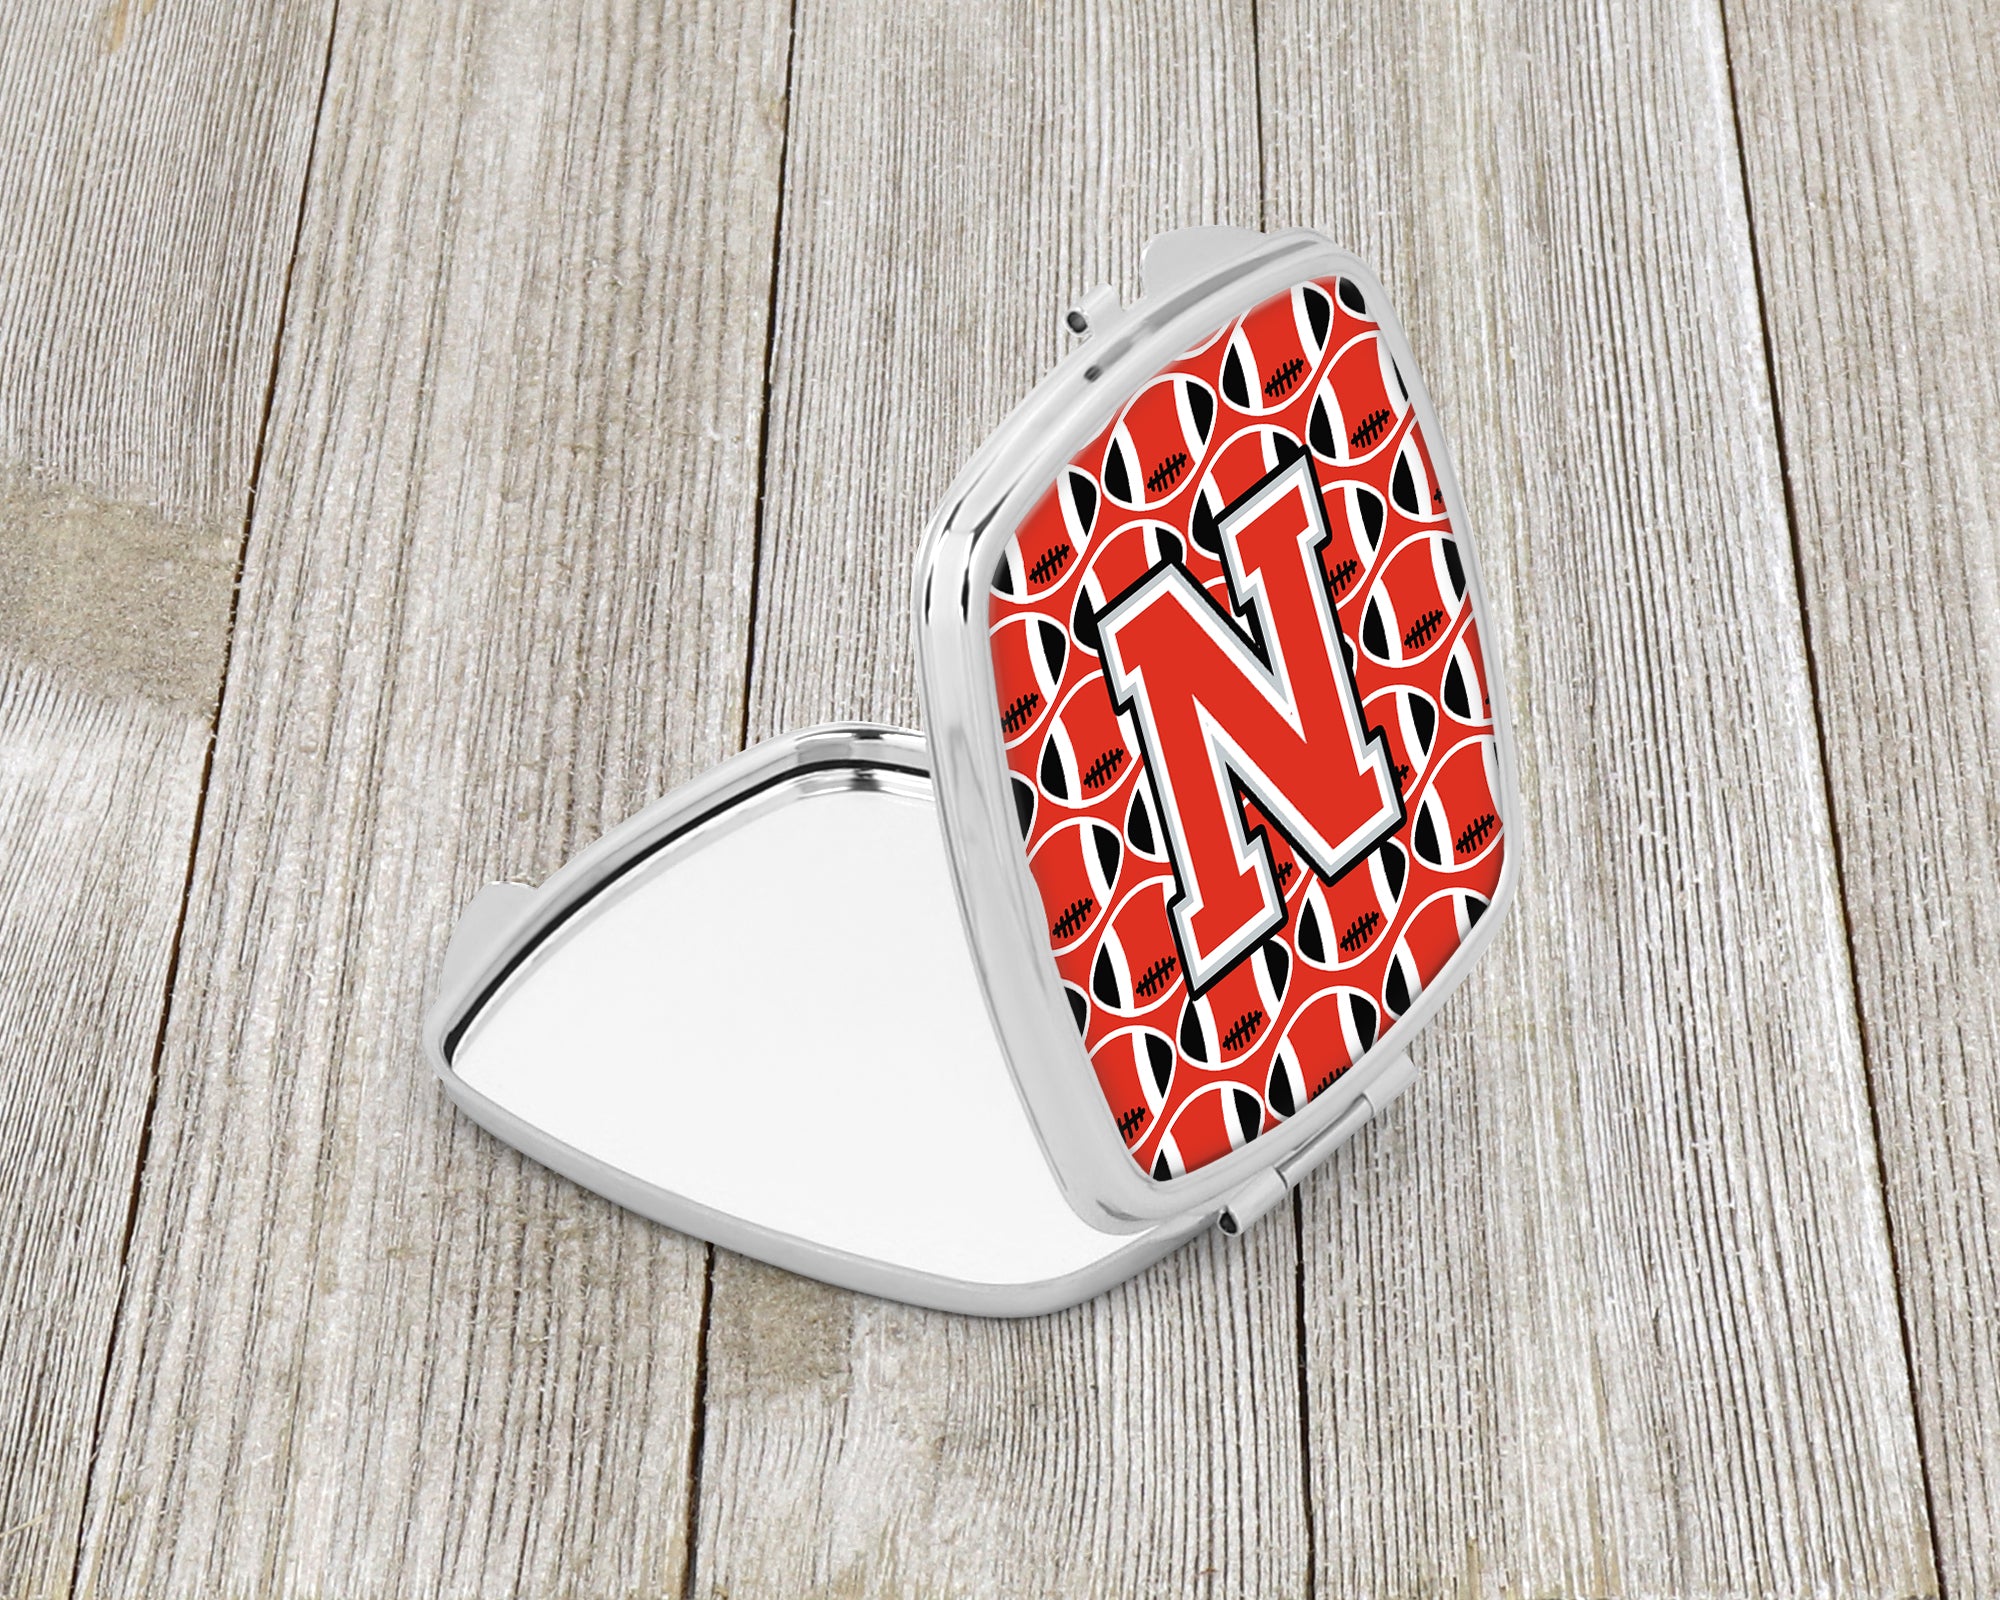 Letter N Football Scarlet and Grey Compact Mirror CJ1067-NSCM